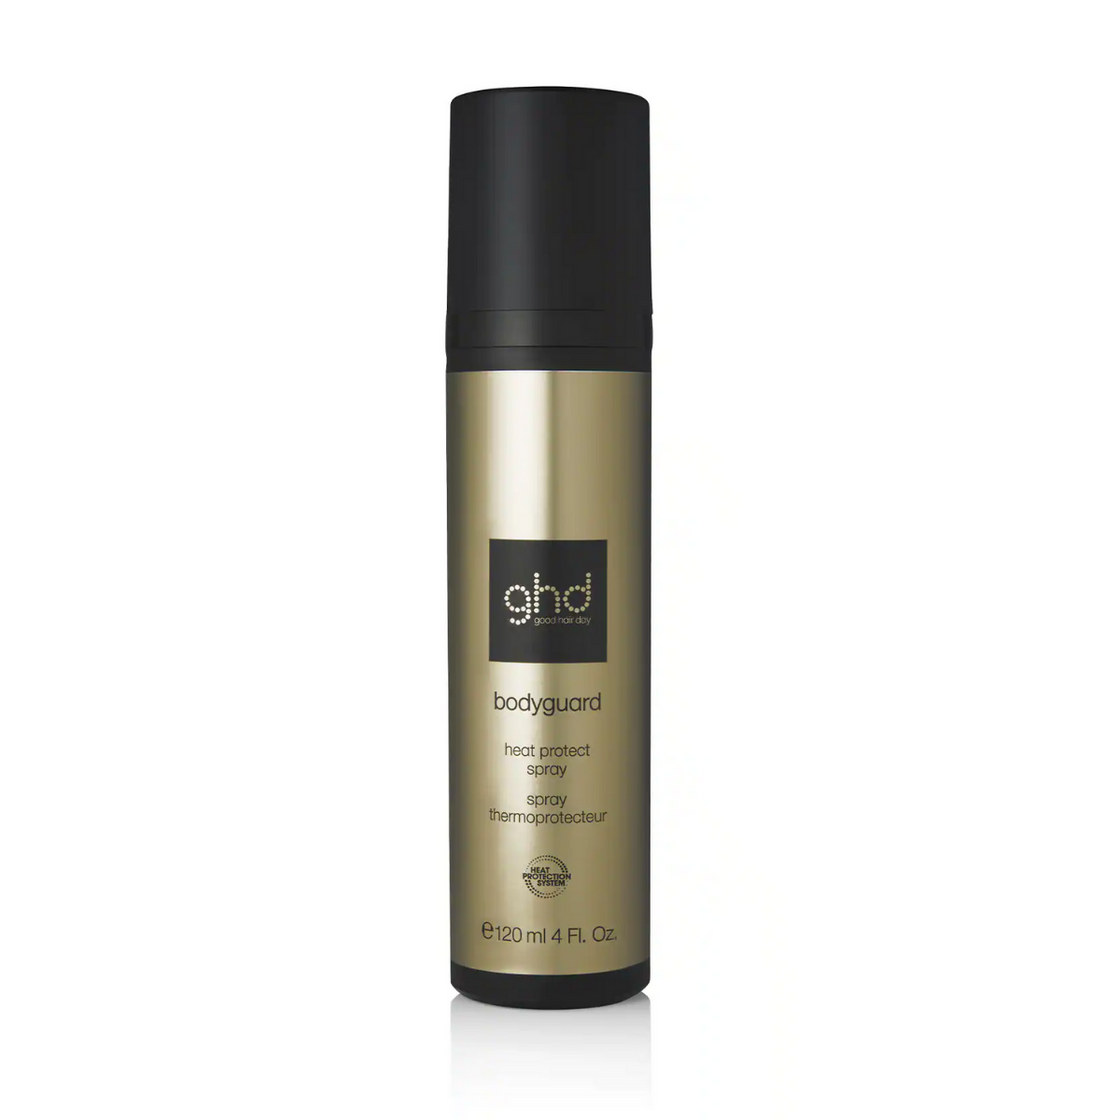 ghd heat protect bodyguard spray termoprotettore